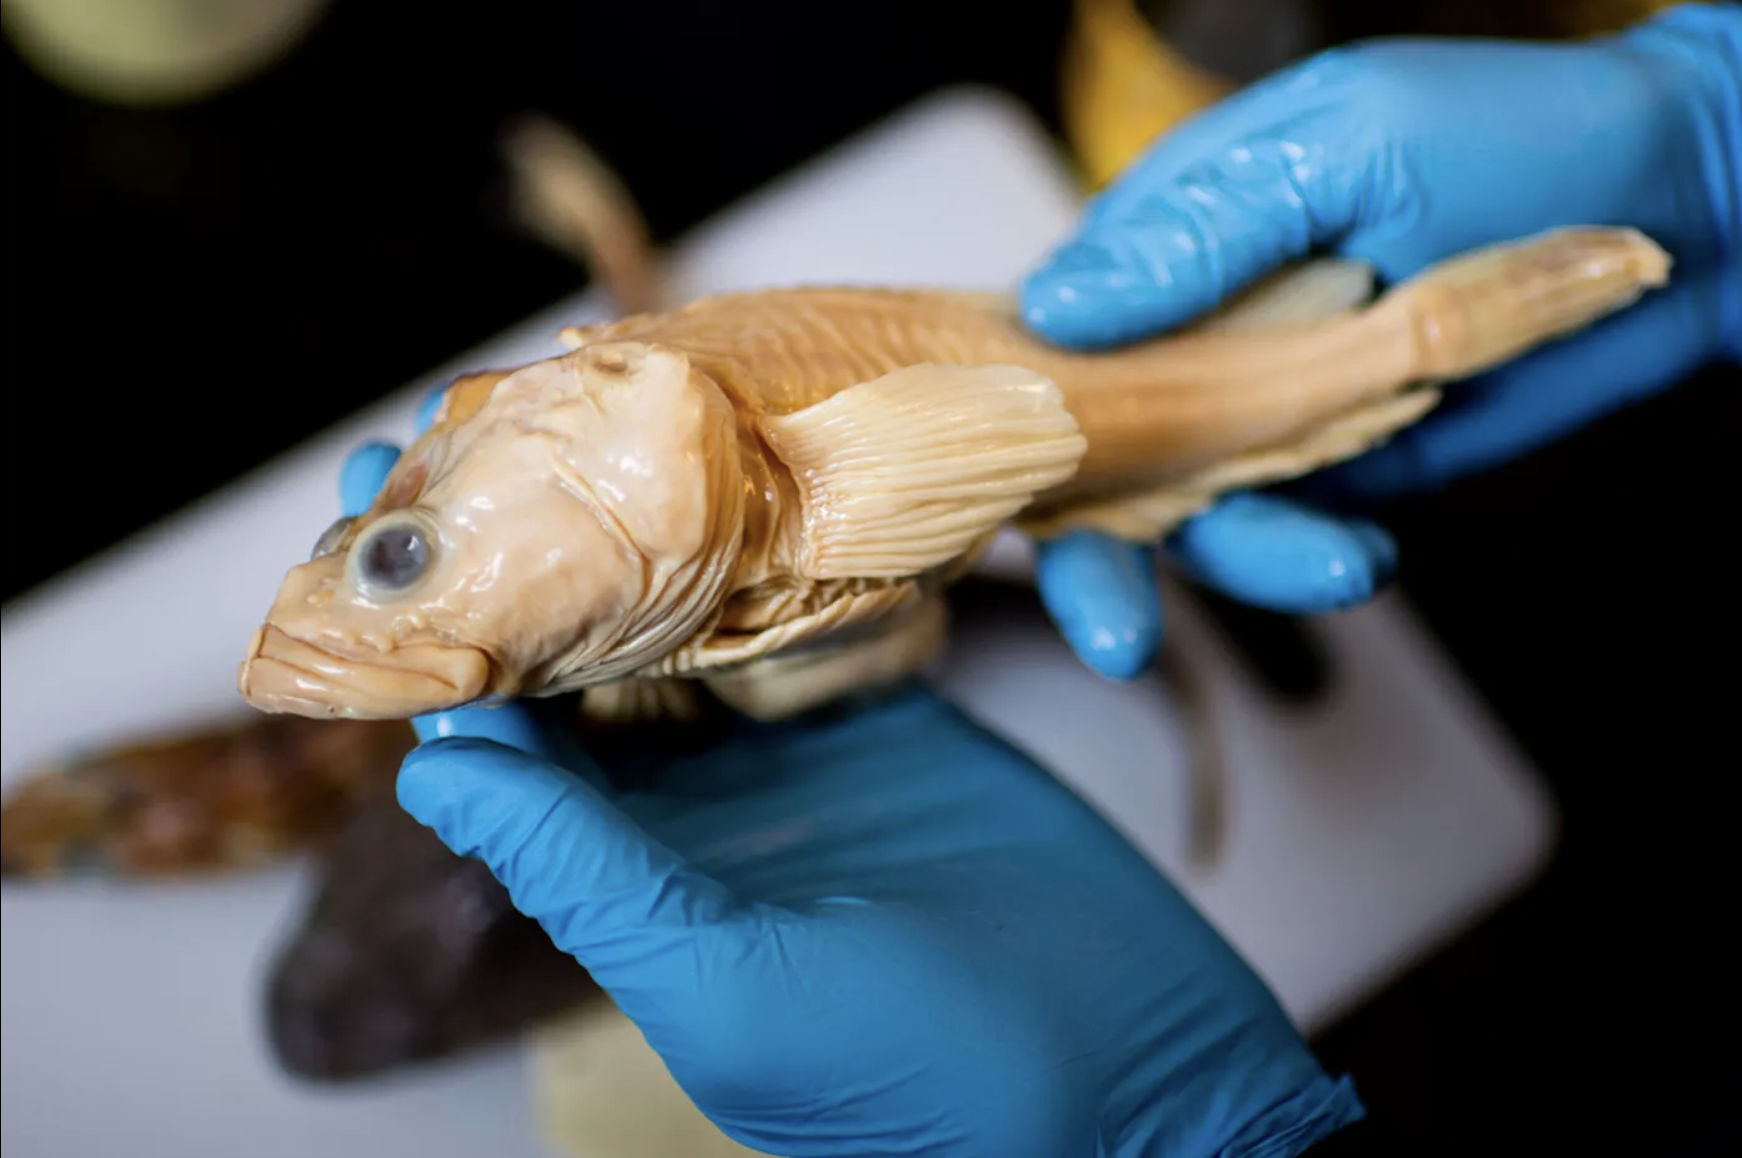 gloved hands hold a preserved fish in the lab